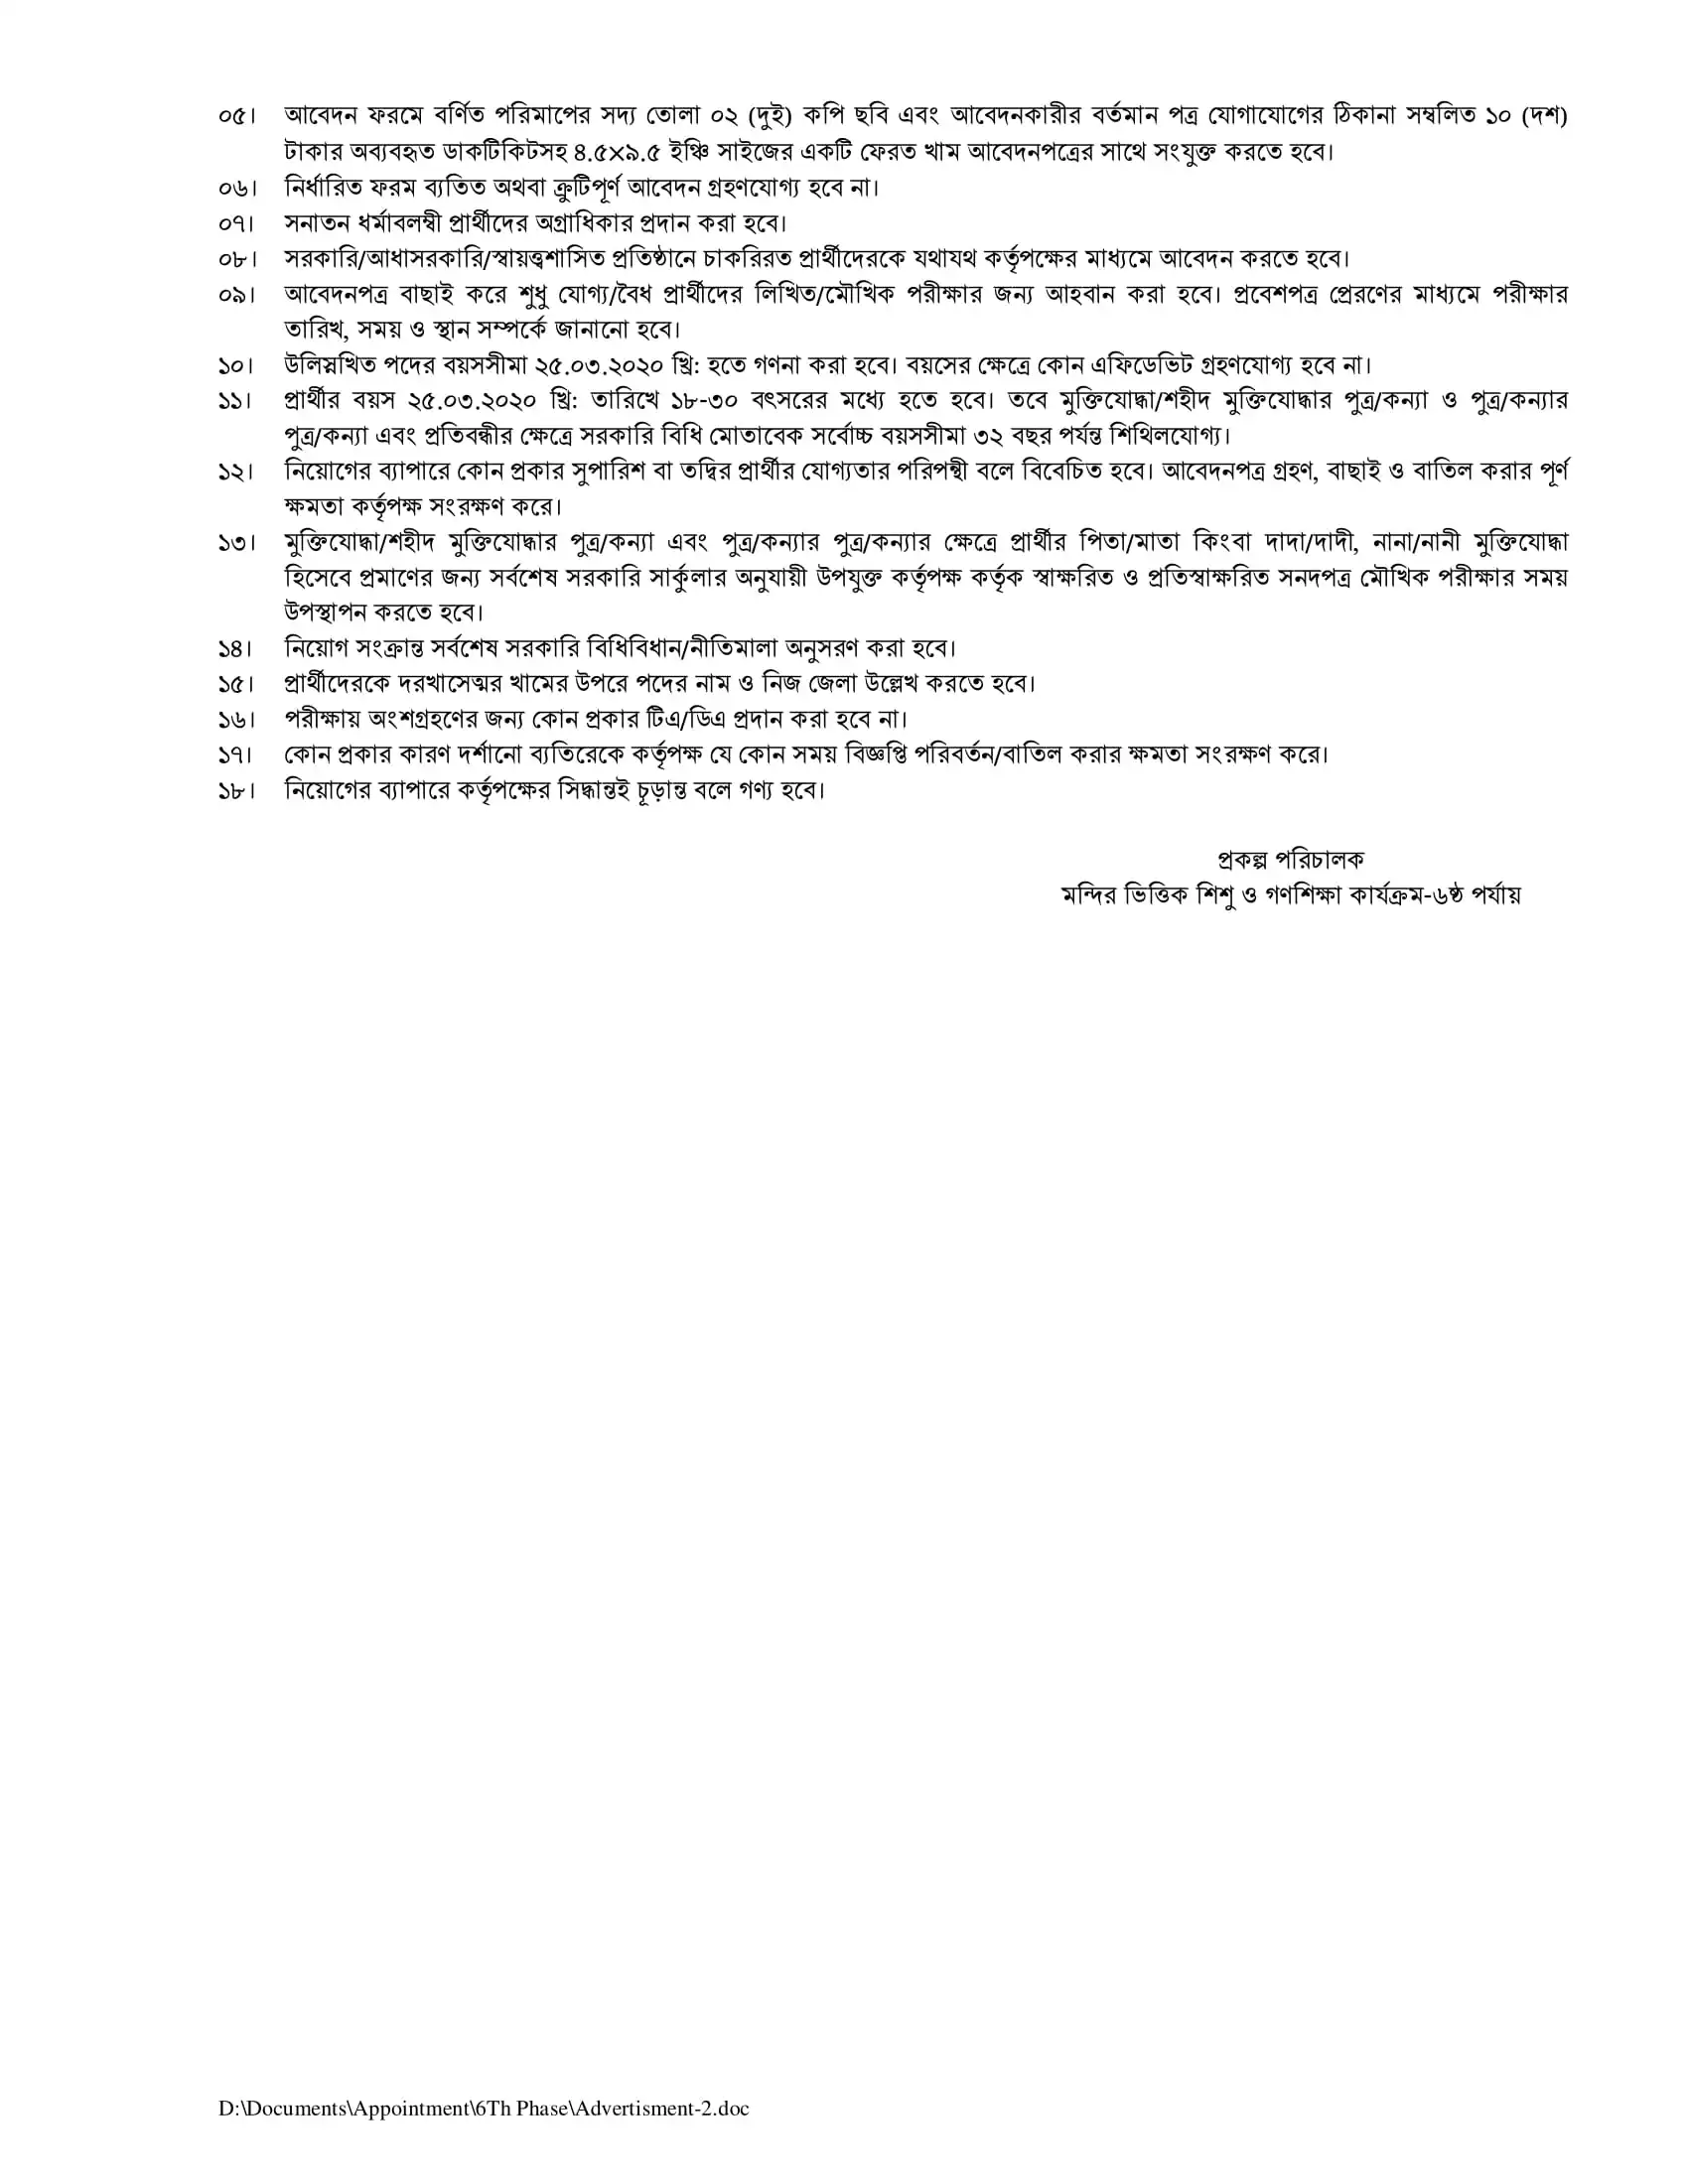 Second page of Ministry of Religious Affairs (MORA) recruitment circular published on 22 January 2023